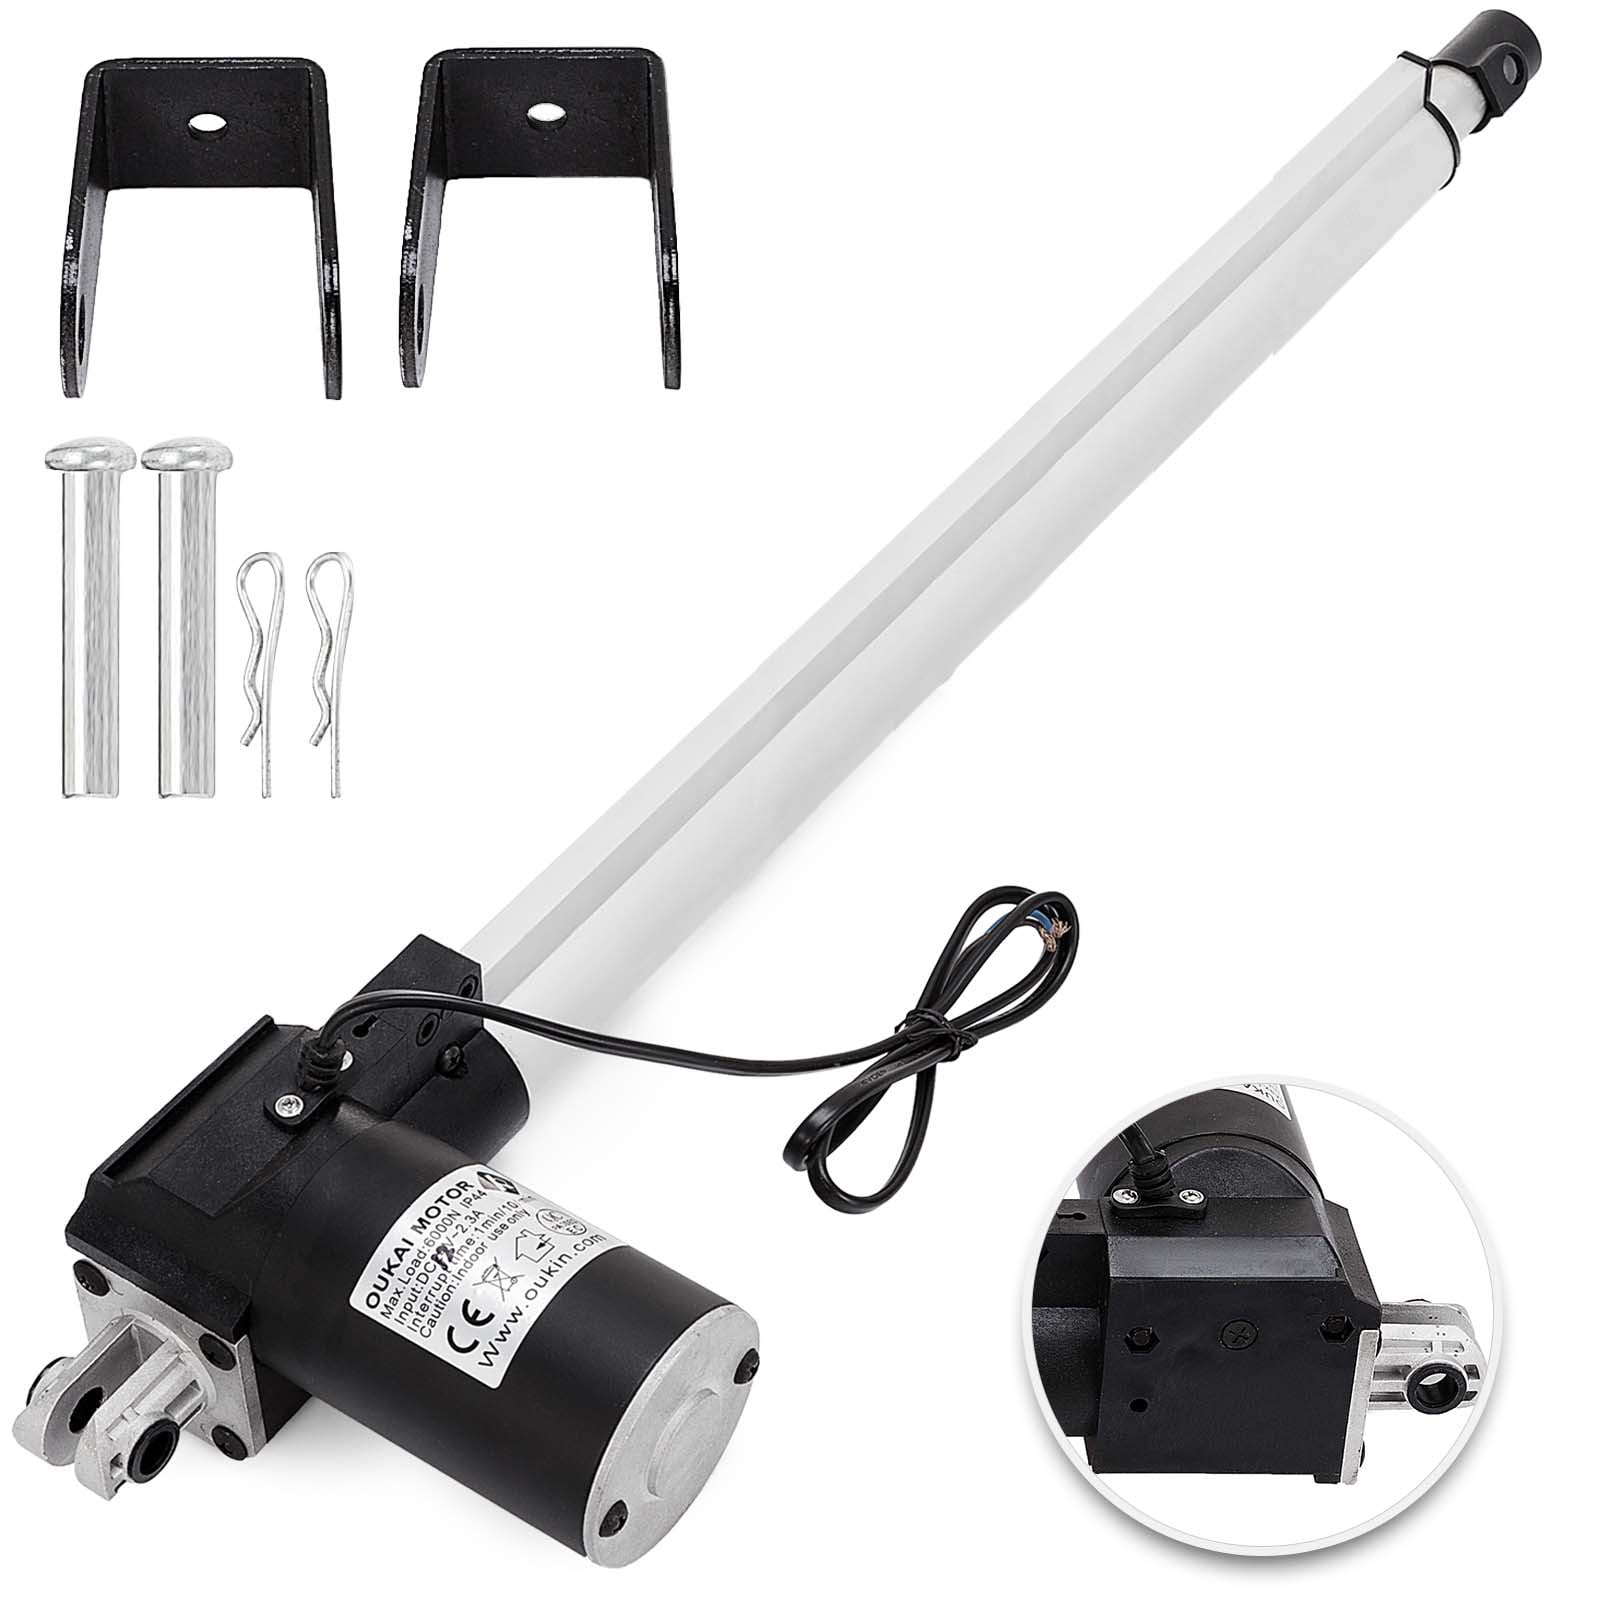 Homend DC 12V 8 Inch Stroke Linear Actuator with Mounting Bracket 200MM 6000N/1320LB Maximum Load for Recliner TV Table Lift Massage Bed Electric Sofa Linear Actuator 